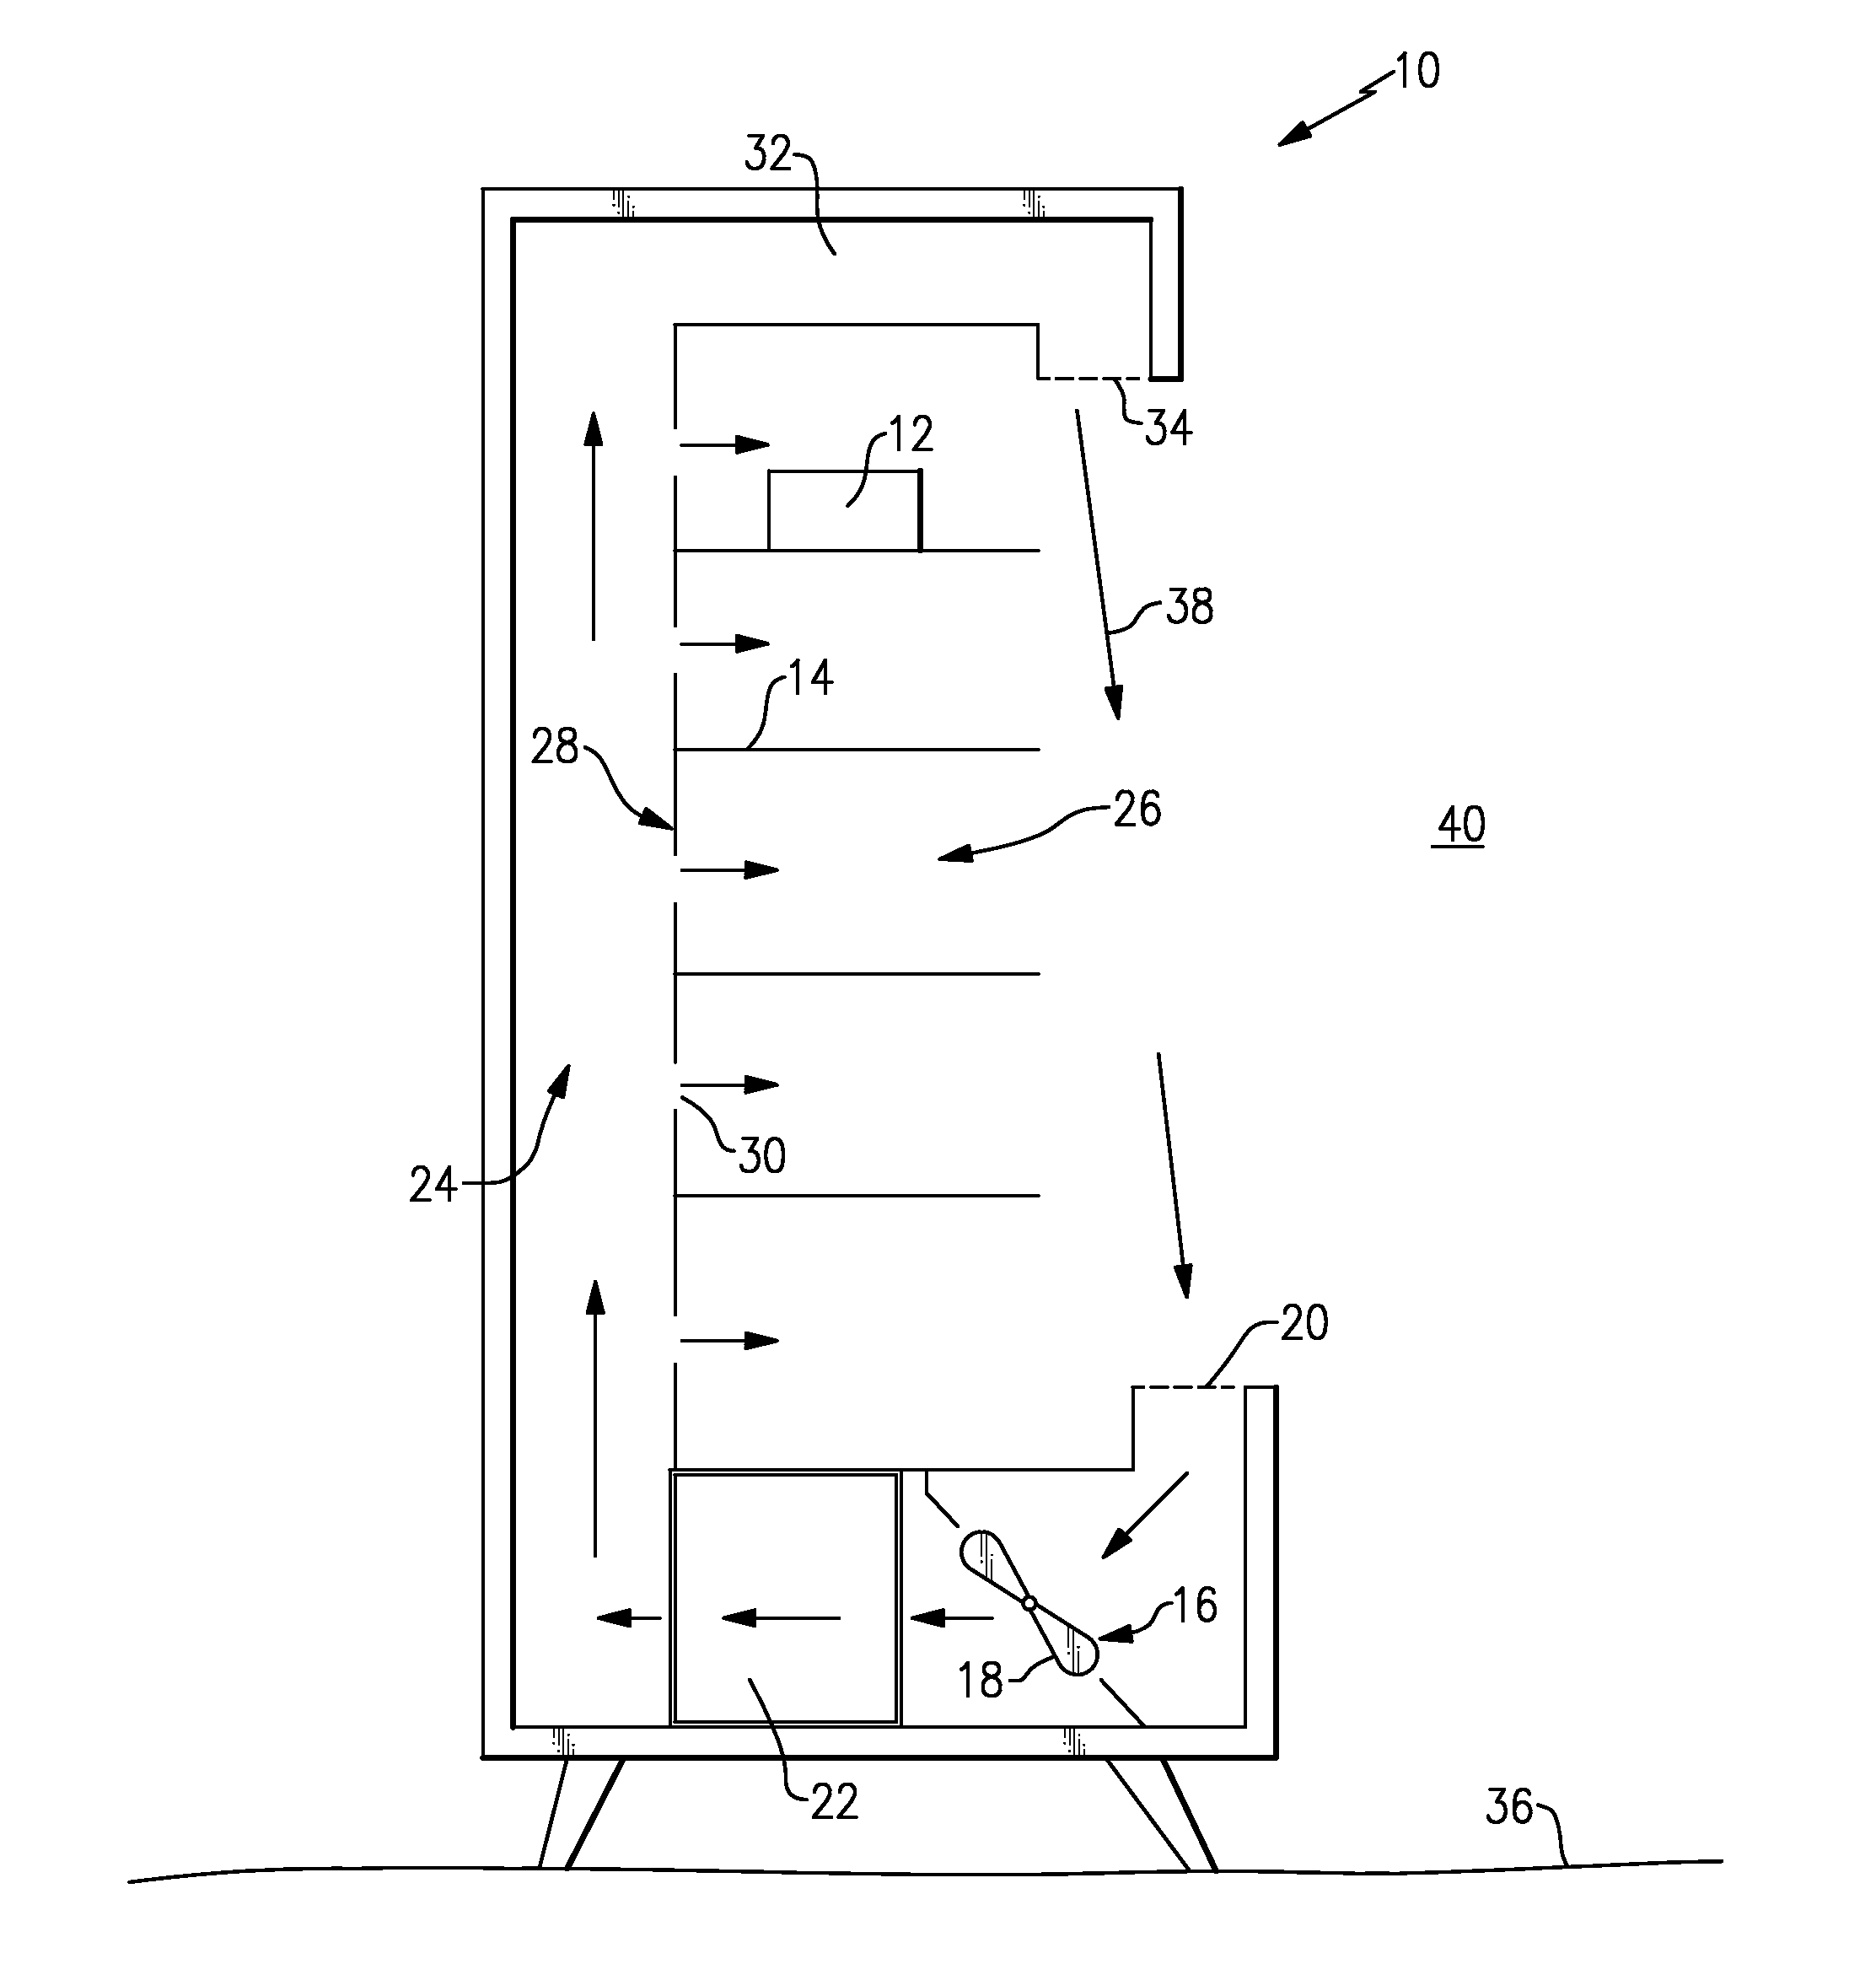 Display case including heat exchanger for reducing relative humidity